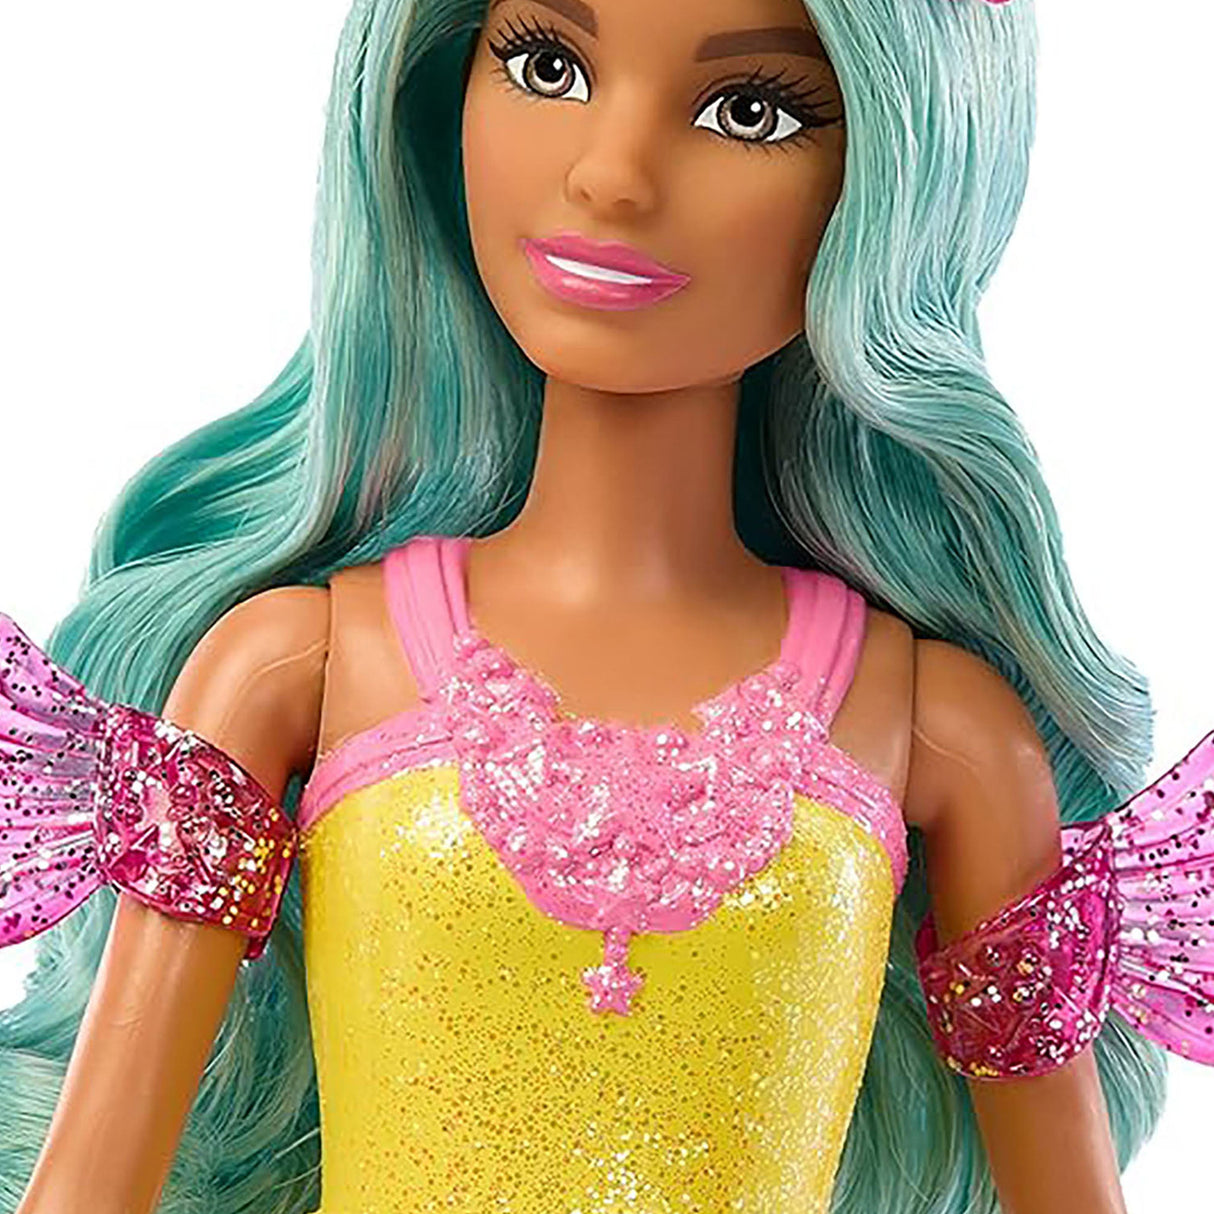 Barbie A Touch of Magic Dolls with Fairytale Outfits Teresa